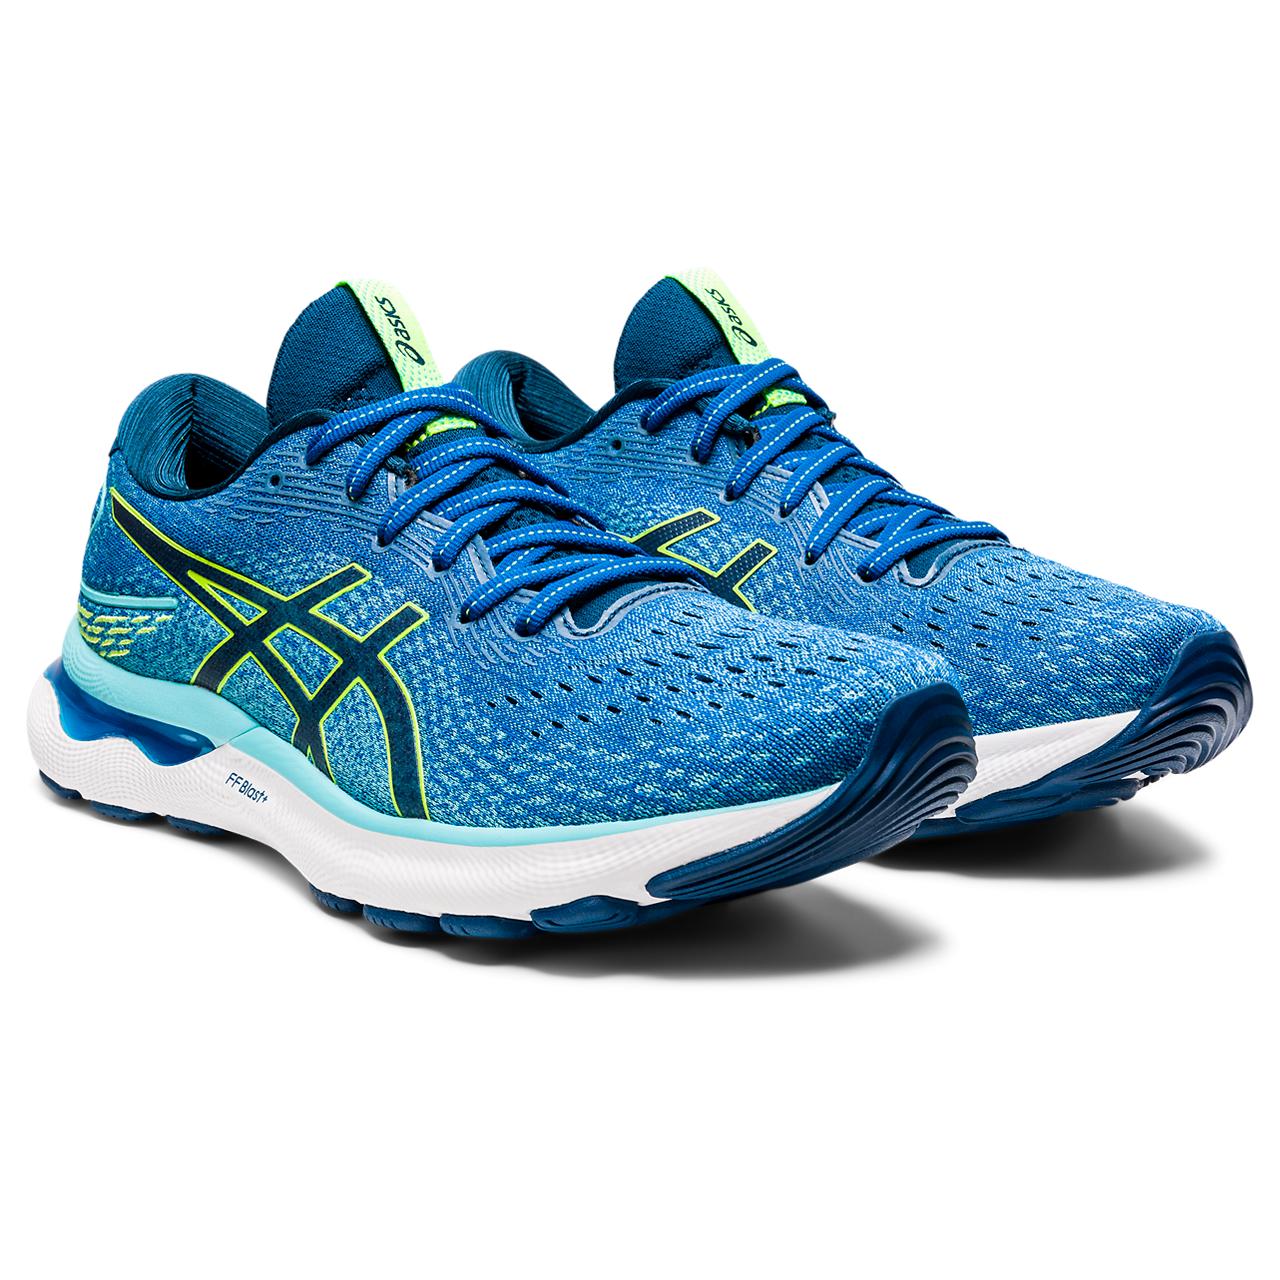 The Men's Nimbus 24 is one of the classics from ASICS.  It's been one of the best-selling cushioned neutral shoes for many years and will no doubt continue that trend with version 24.